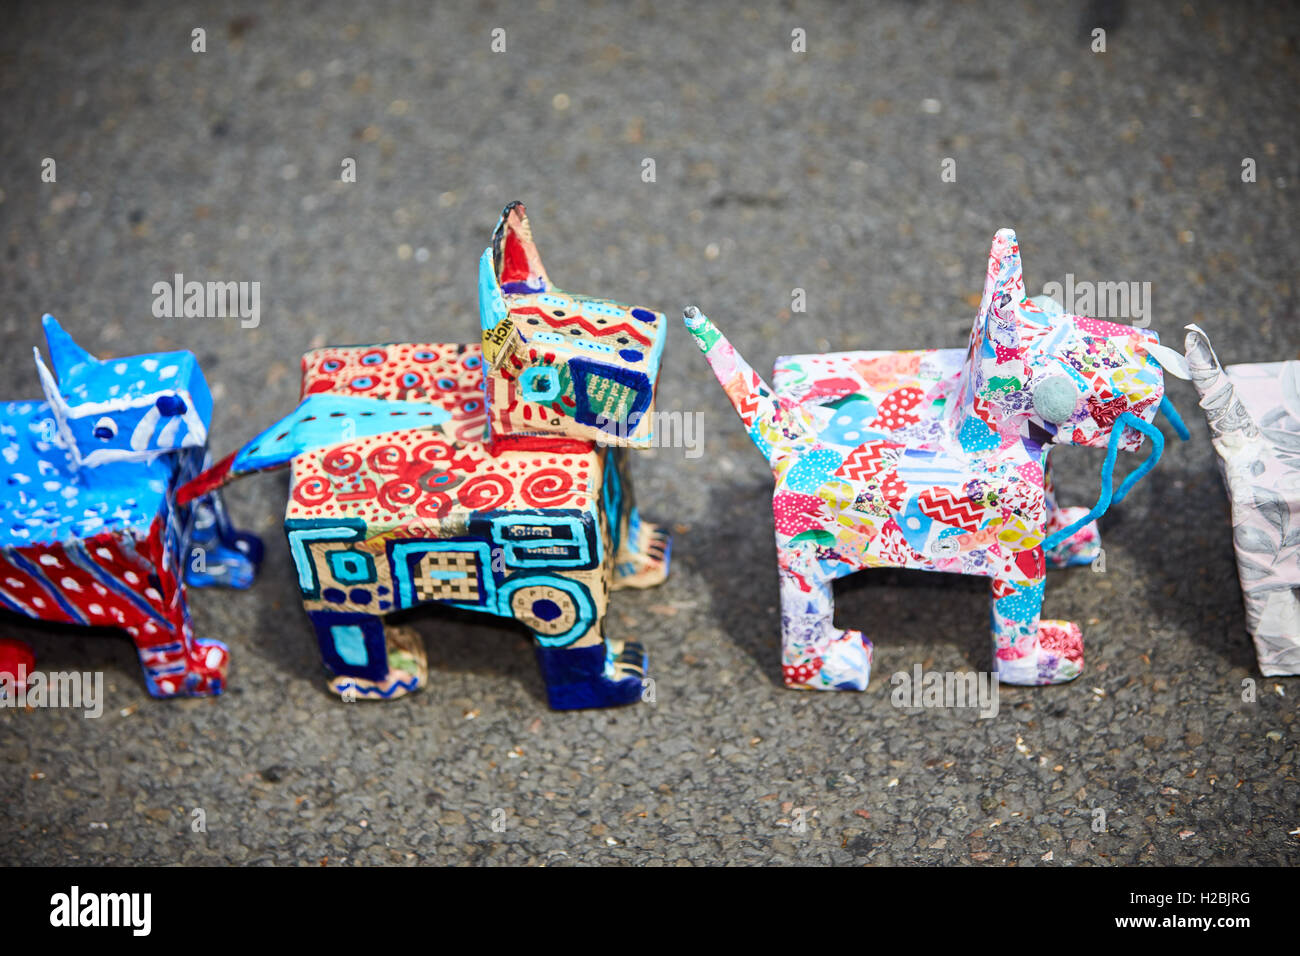 Papier-mâché pups created on behalf of Oxfordshire Mind for the Cowley Road Carnival Stock Photo